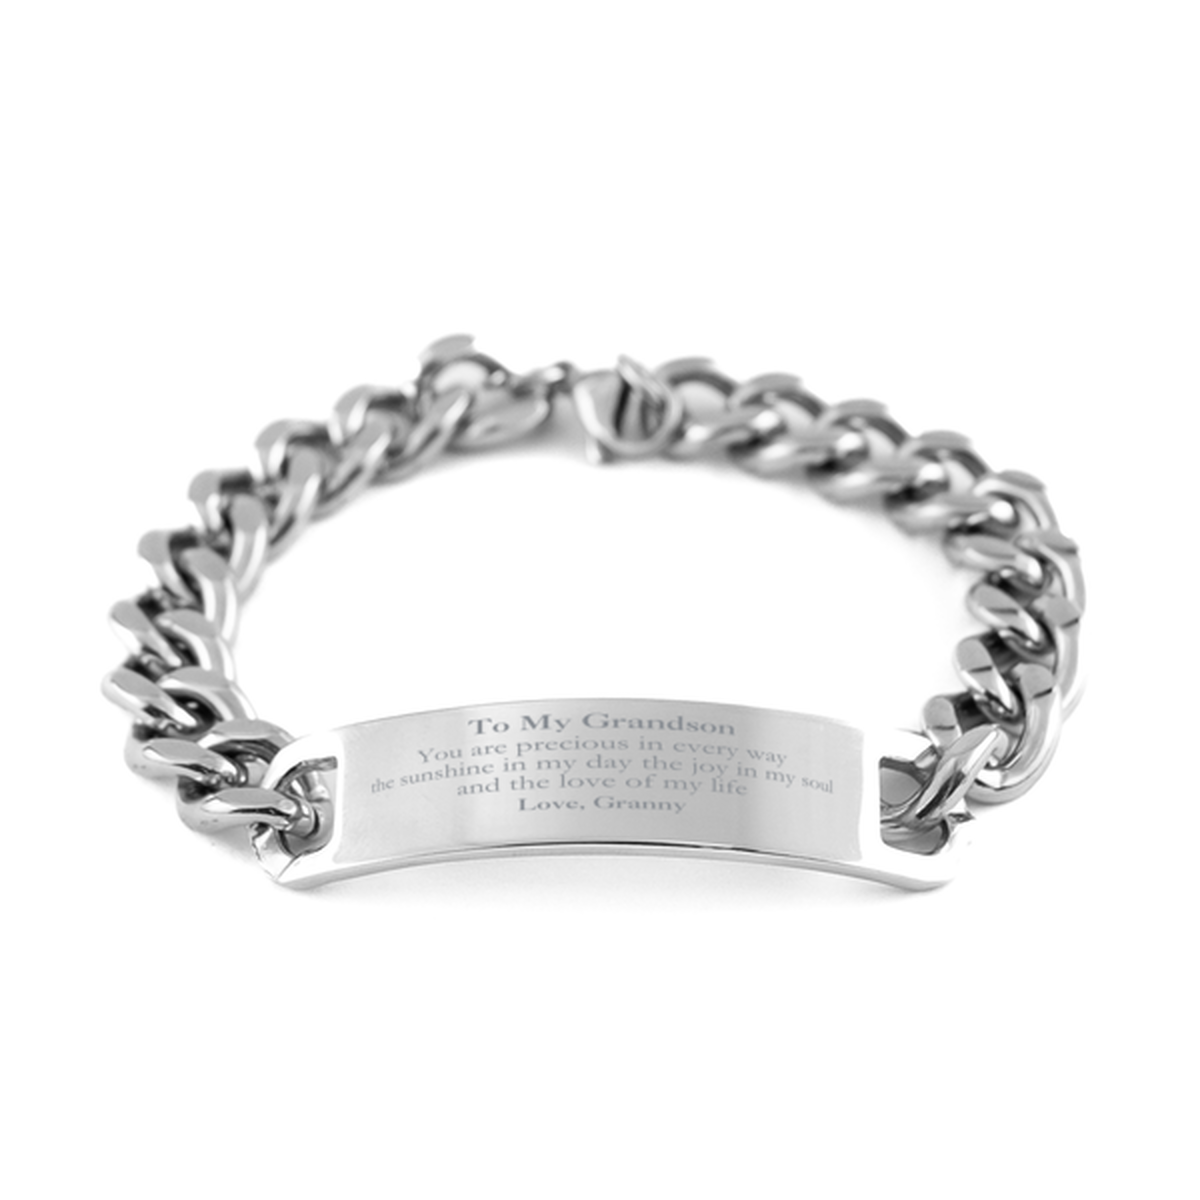 Graduation Gifts for Grandson Cuban Chain Stainless Steel Bracelet Present from Granny, Christmas Grandson Birthday Gifts Grandson You are precious in every way the sunshine in my day. Love, Granny